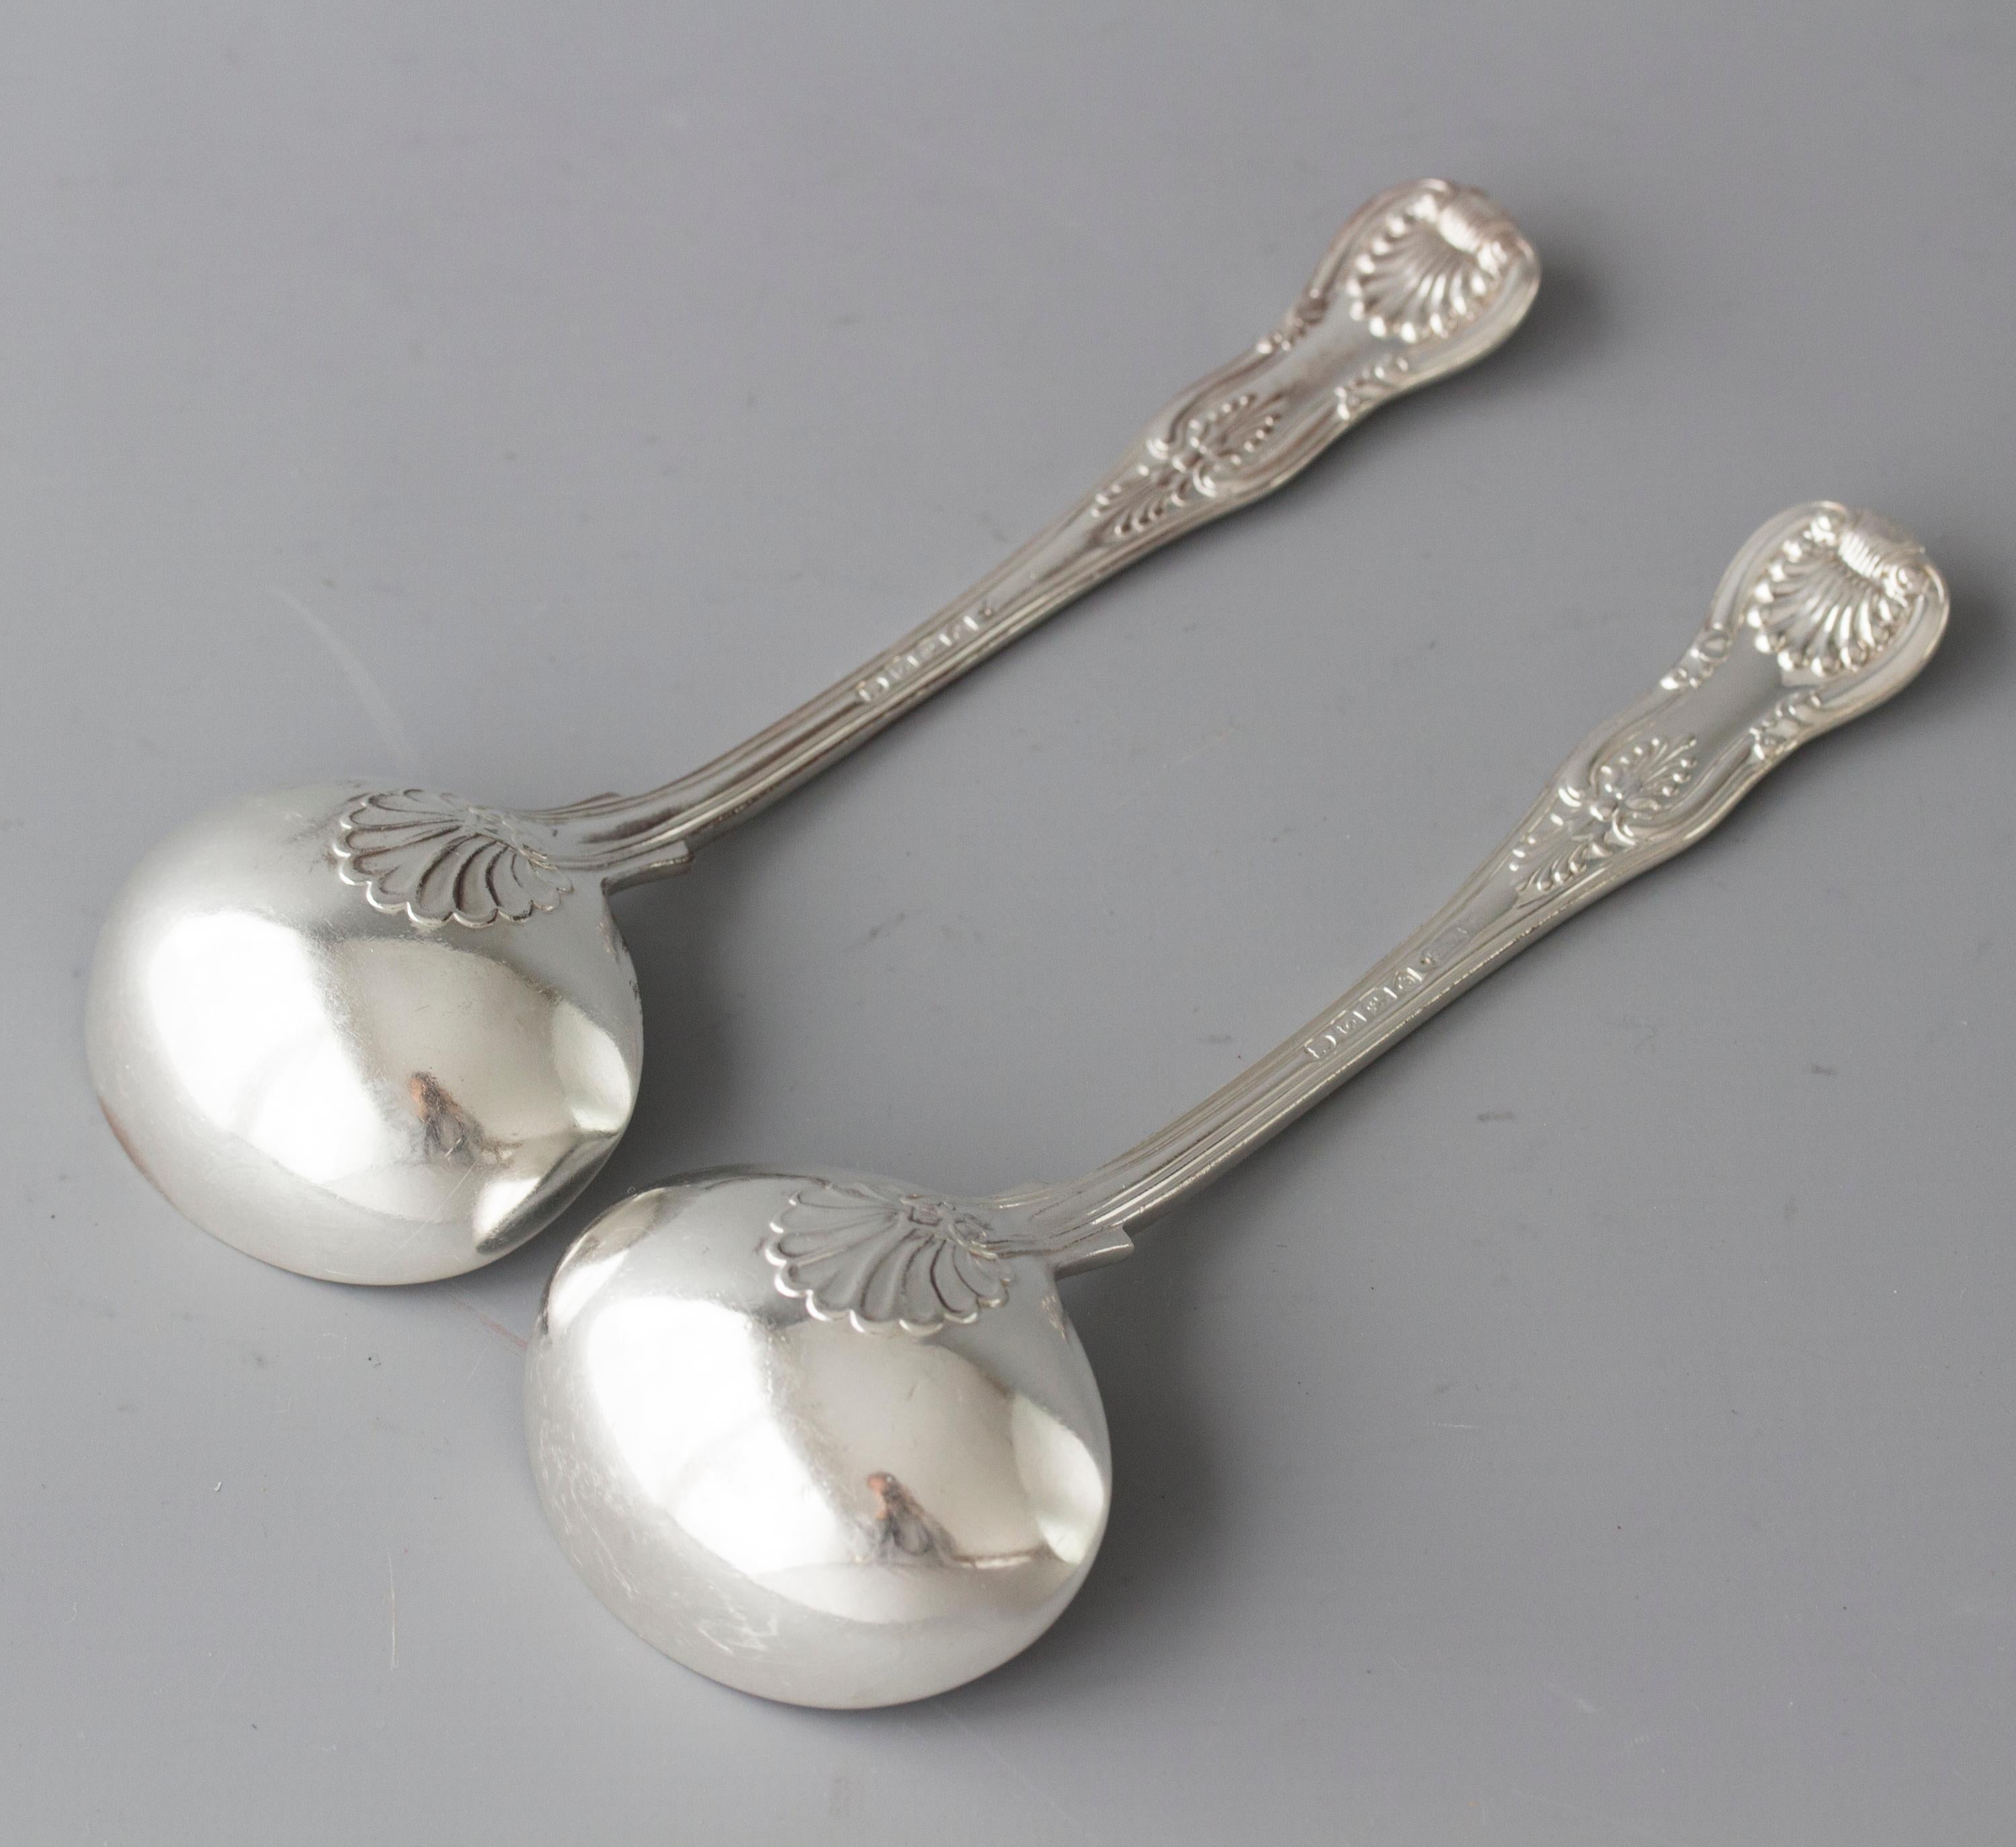 This highly collectable pair of Kings pattern silver sauce ladles are in the sought-after double-struck standard form with the diamond heel, with a plain bowl.

Hallmarked for London 1834, makers mark WE for William Eaton.

Measures: Length 17